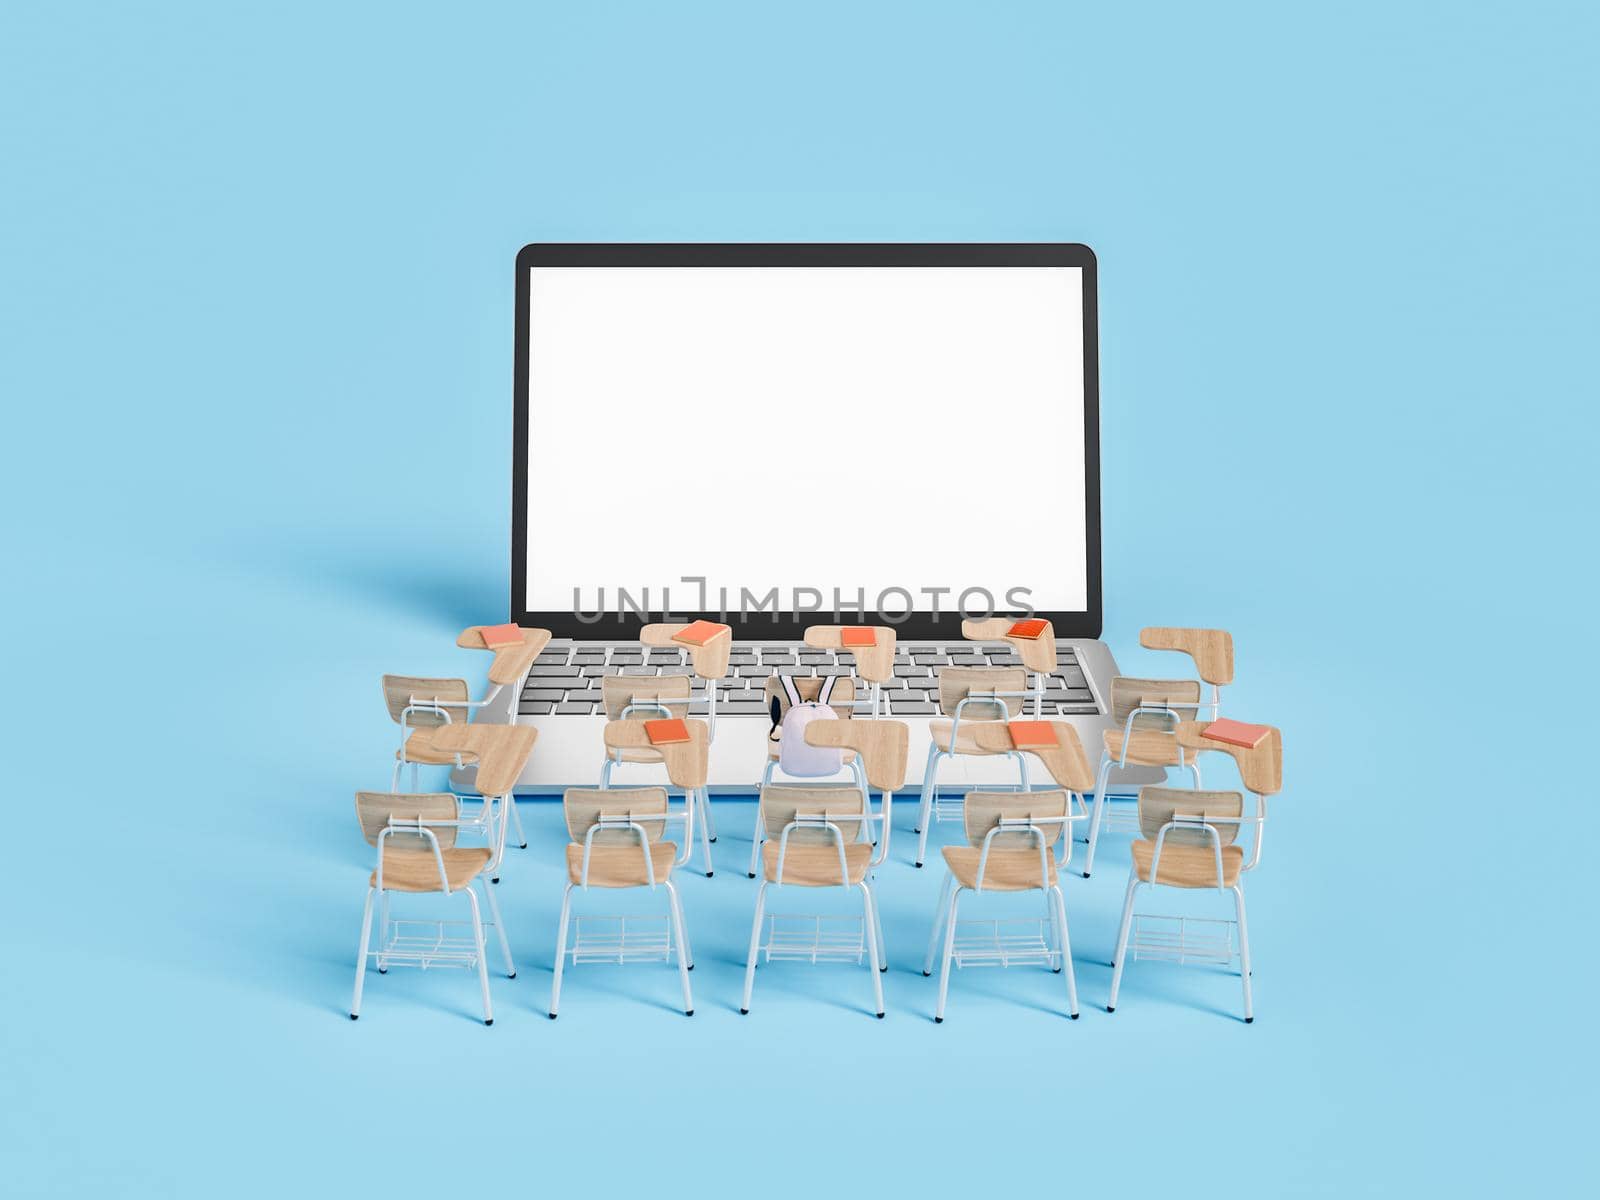 3D laptop near rows of chairs against blue background by asolano